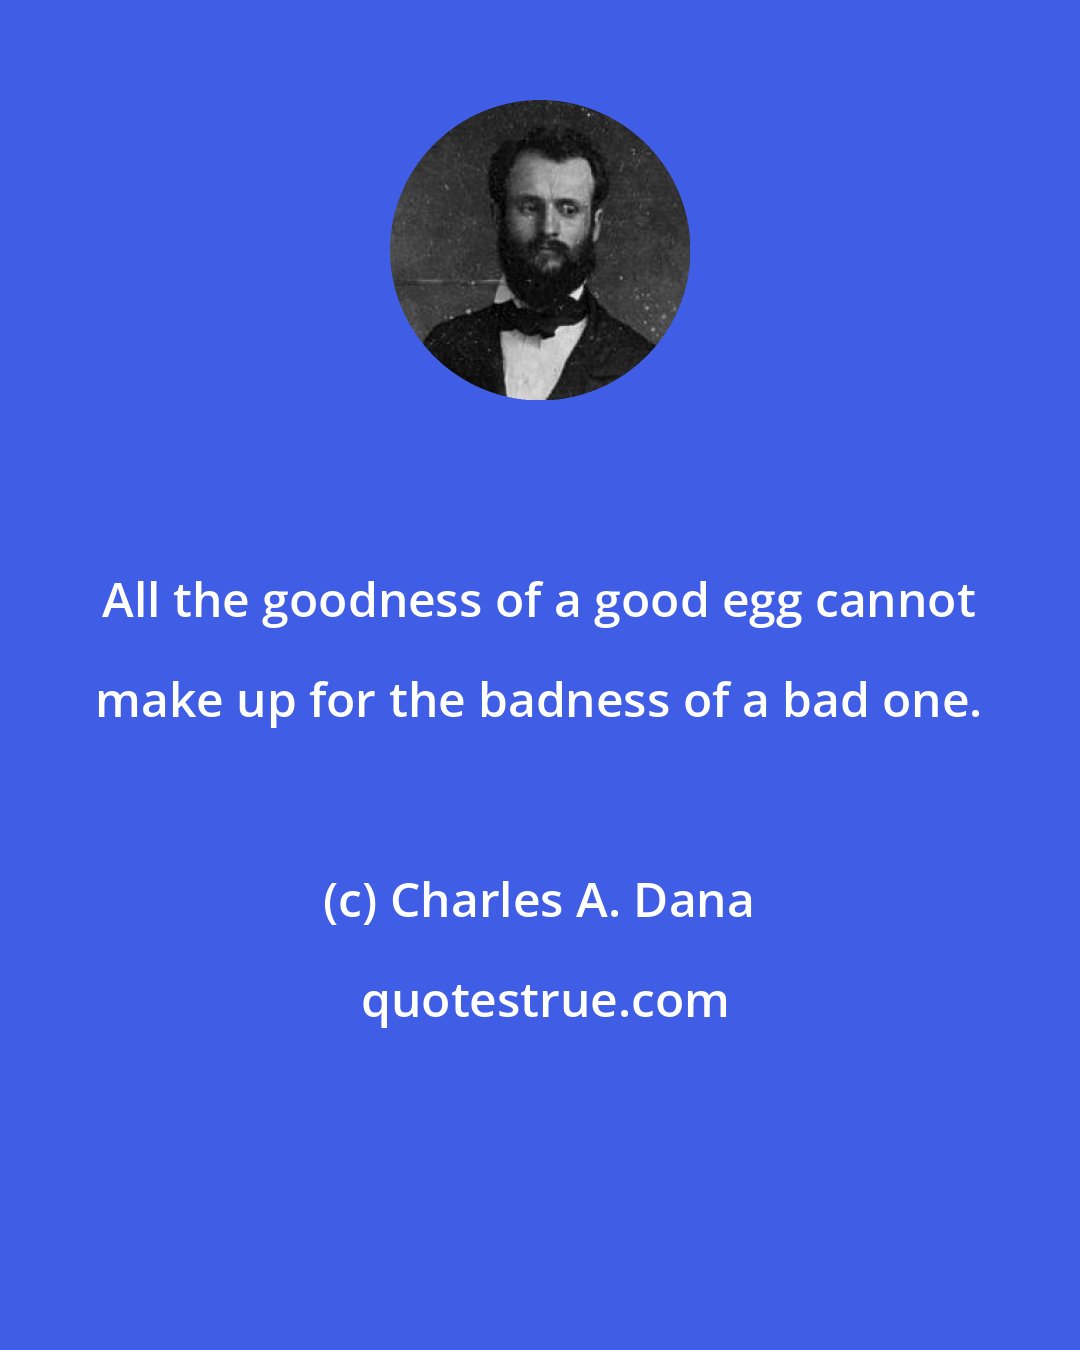 Charles A. Dana: All the goodness of a good egg cannot make up for the badness of a bad one.